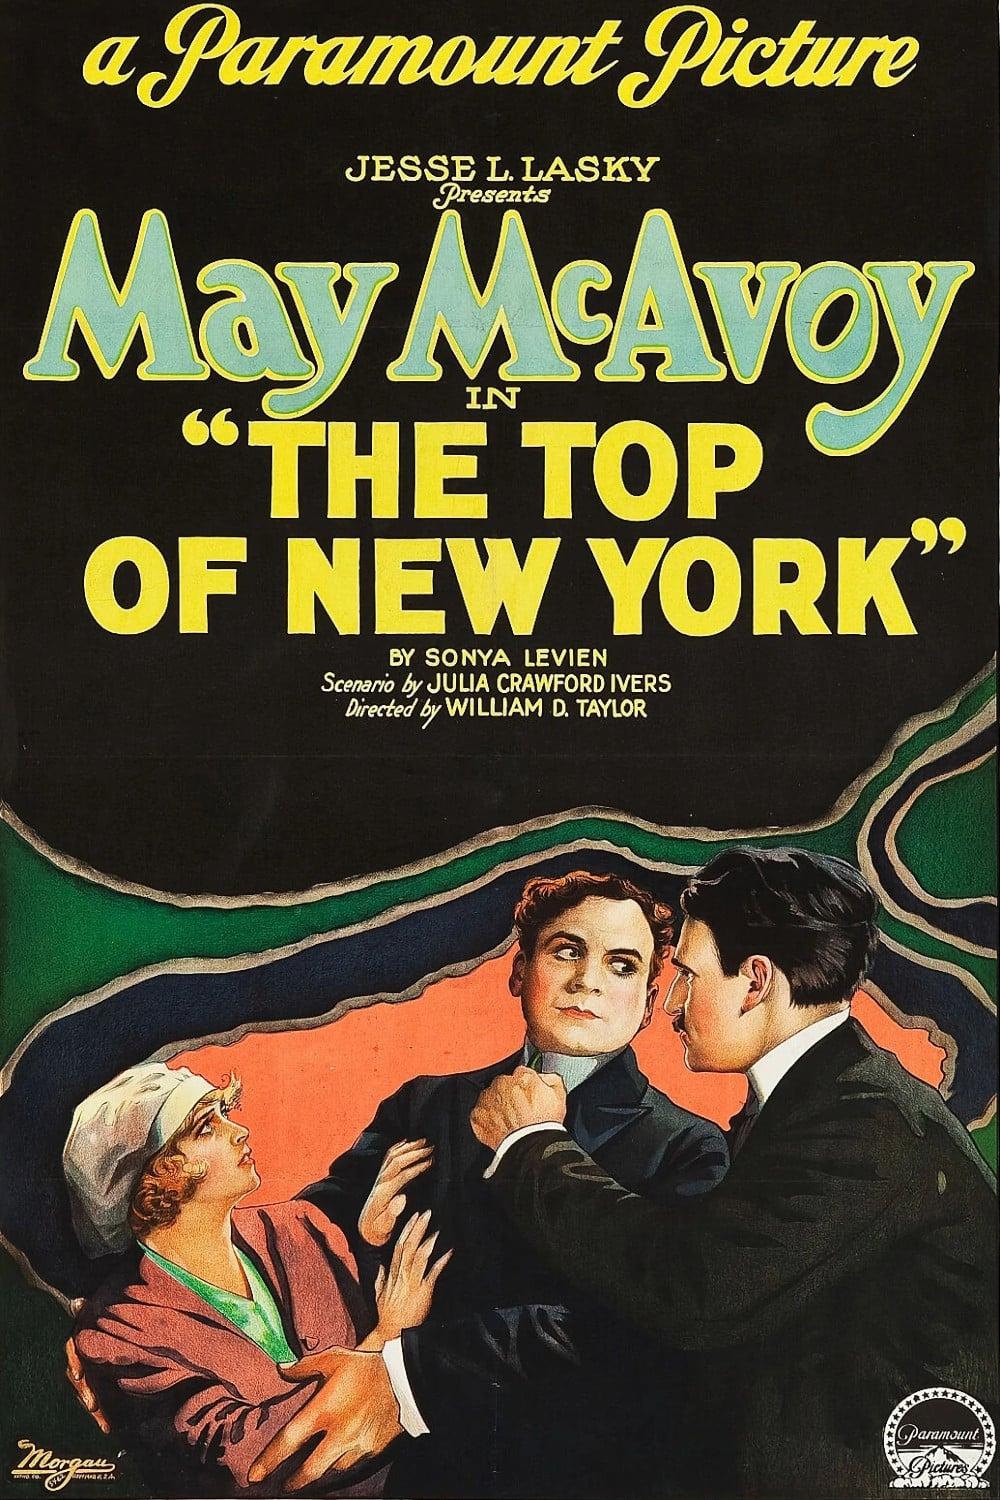 The Top of New York poster